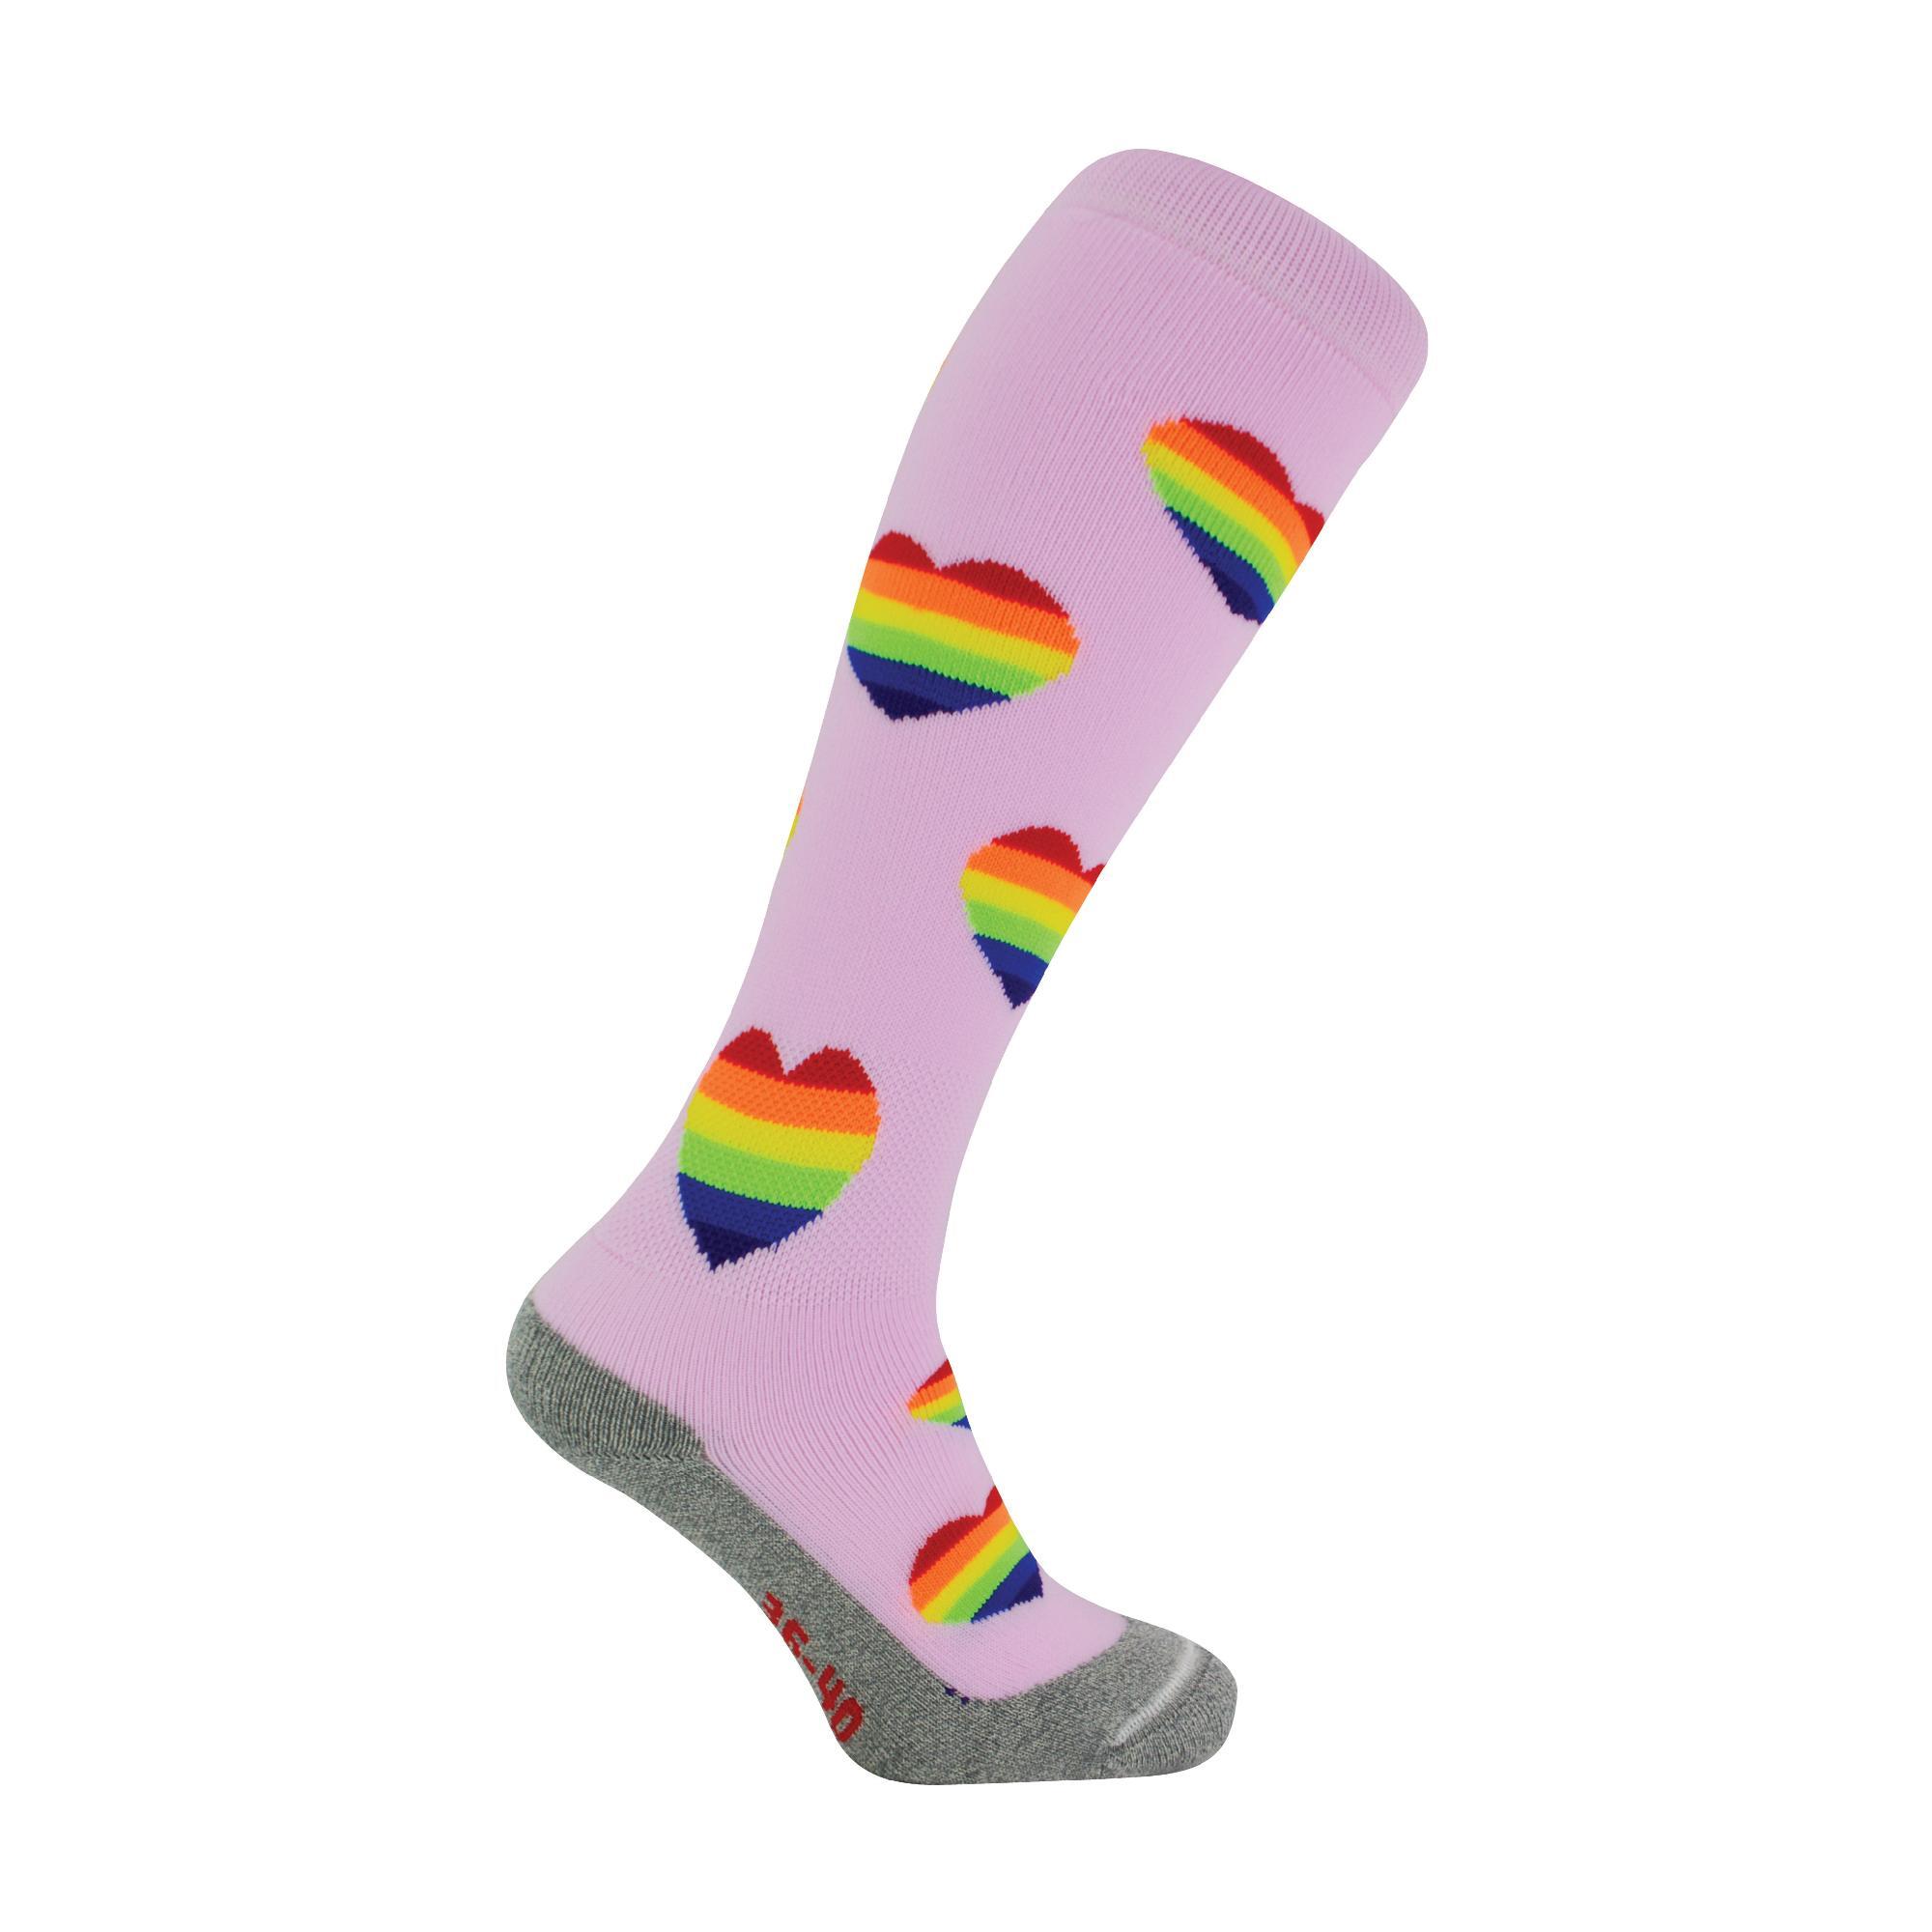 HINGLY Knee High Hockey Socks with Funky Fun Patterns | Kids Sizes